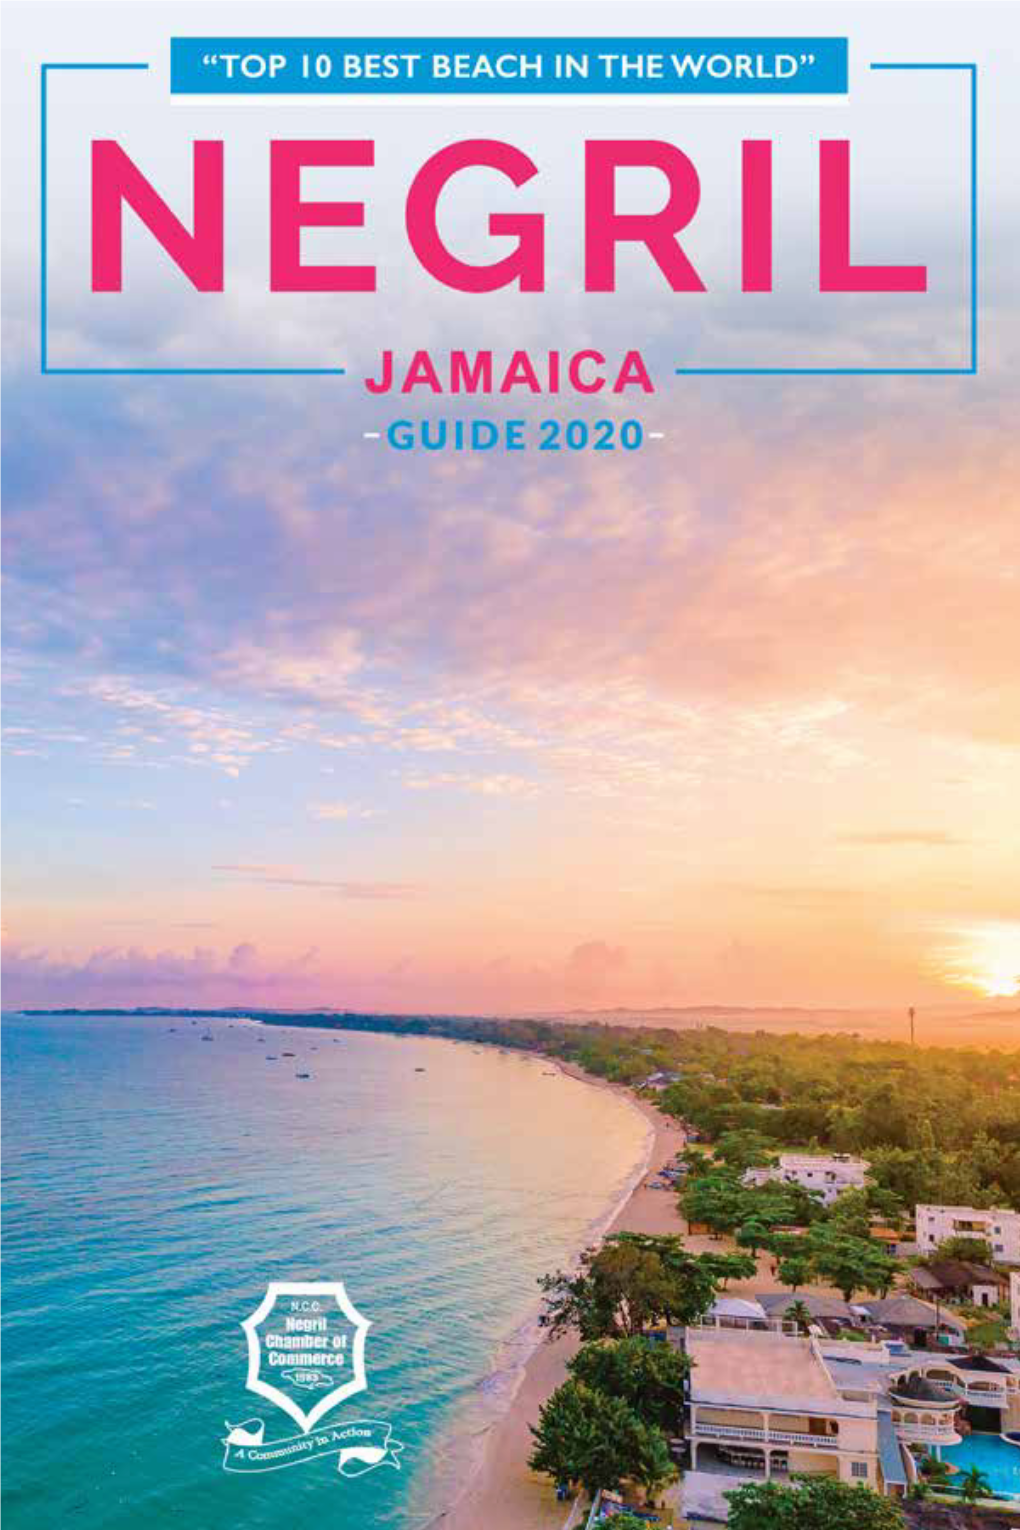 Negril Guide 2020 | 1 Negril Guide 2020 | 2 from the President - Negril Chamber of Commerce